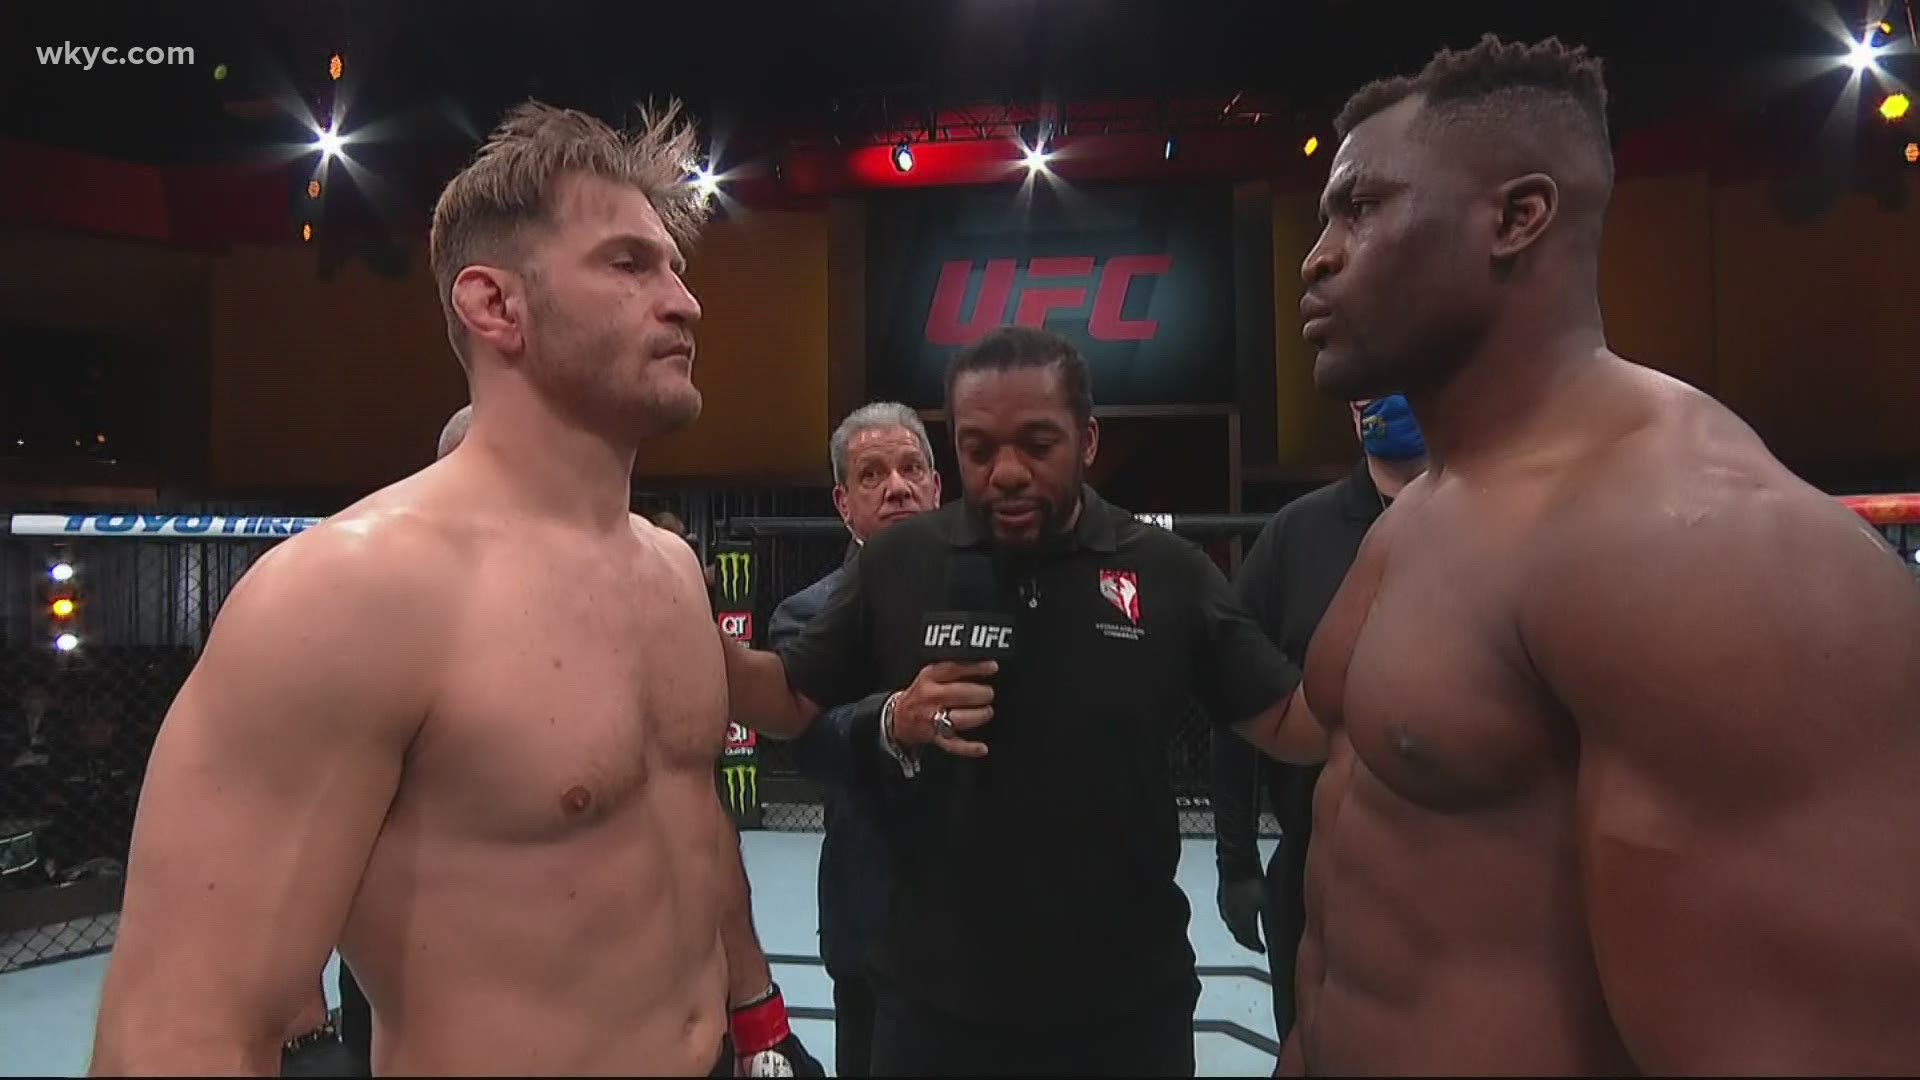 Miocic lost in the second round via a devastating knockout